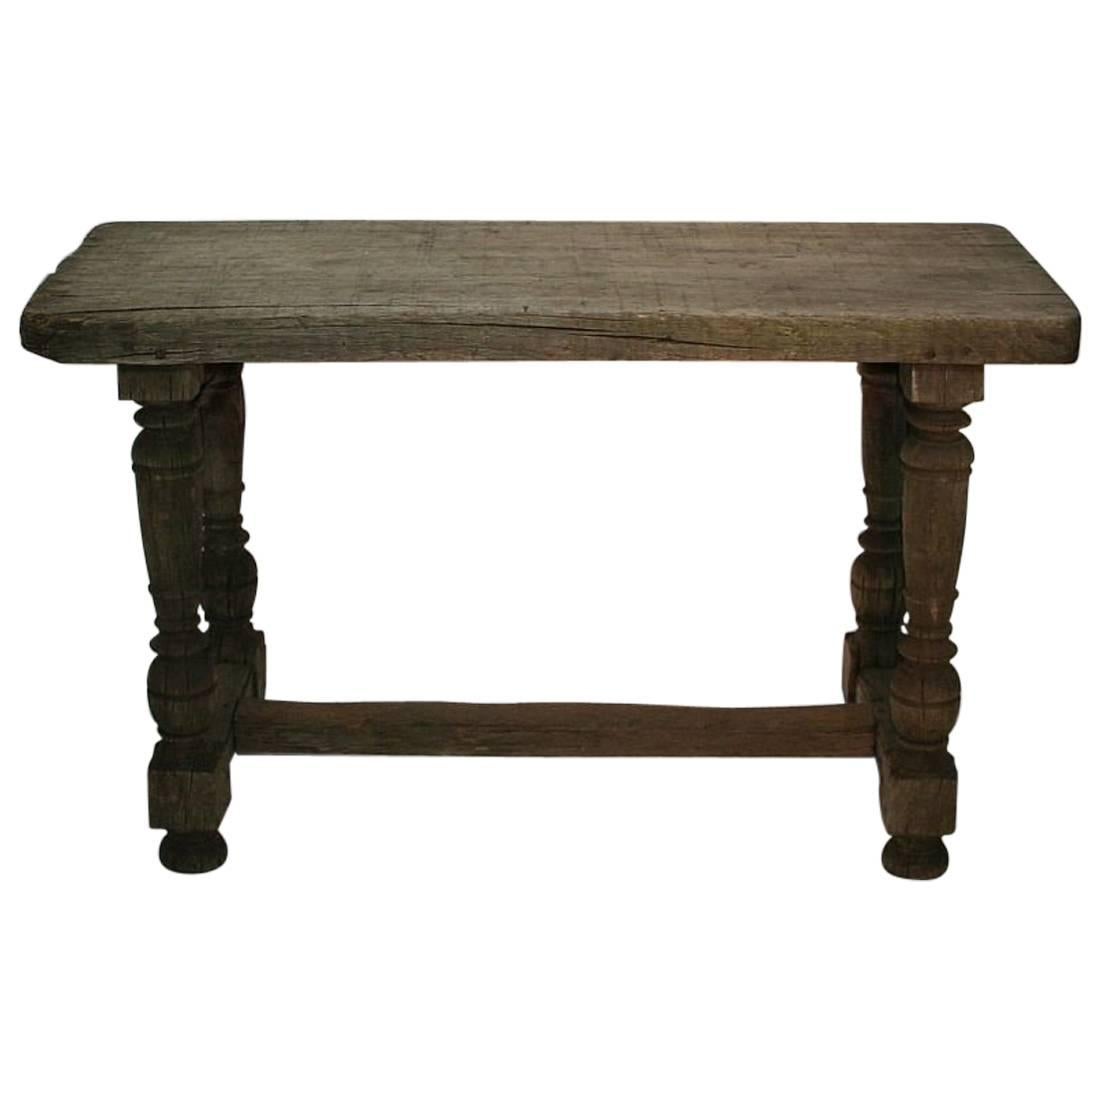 French 18th-19th Century Weathered Oak Table